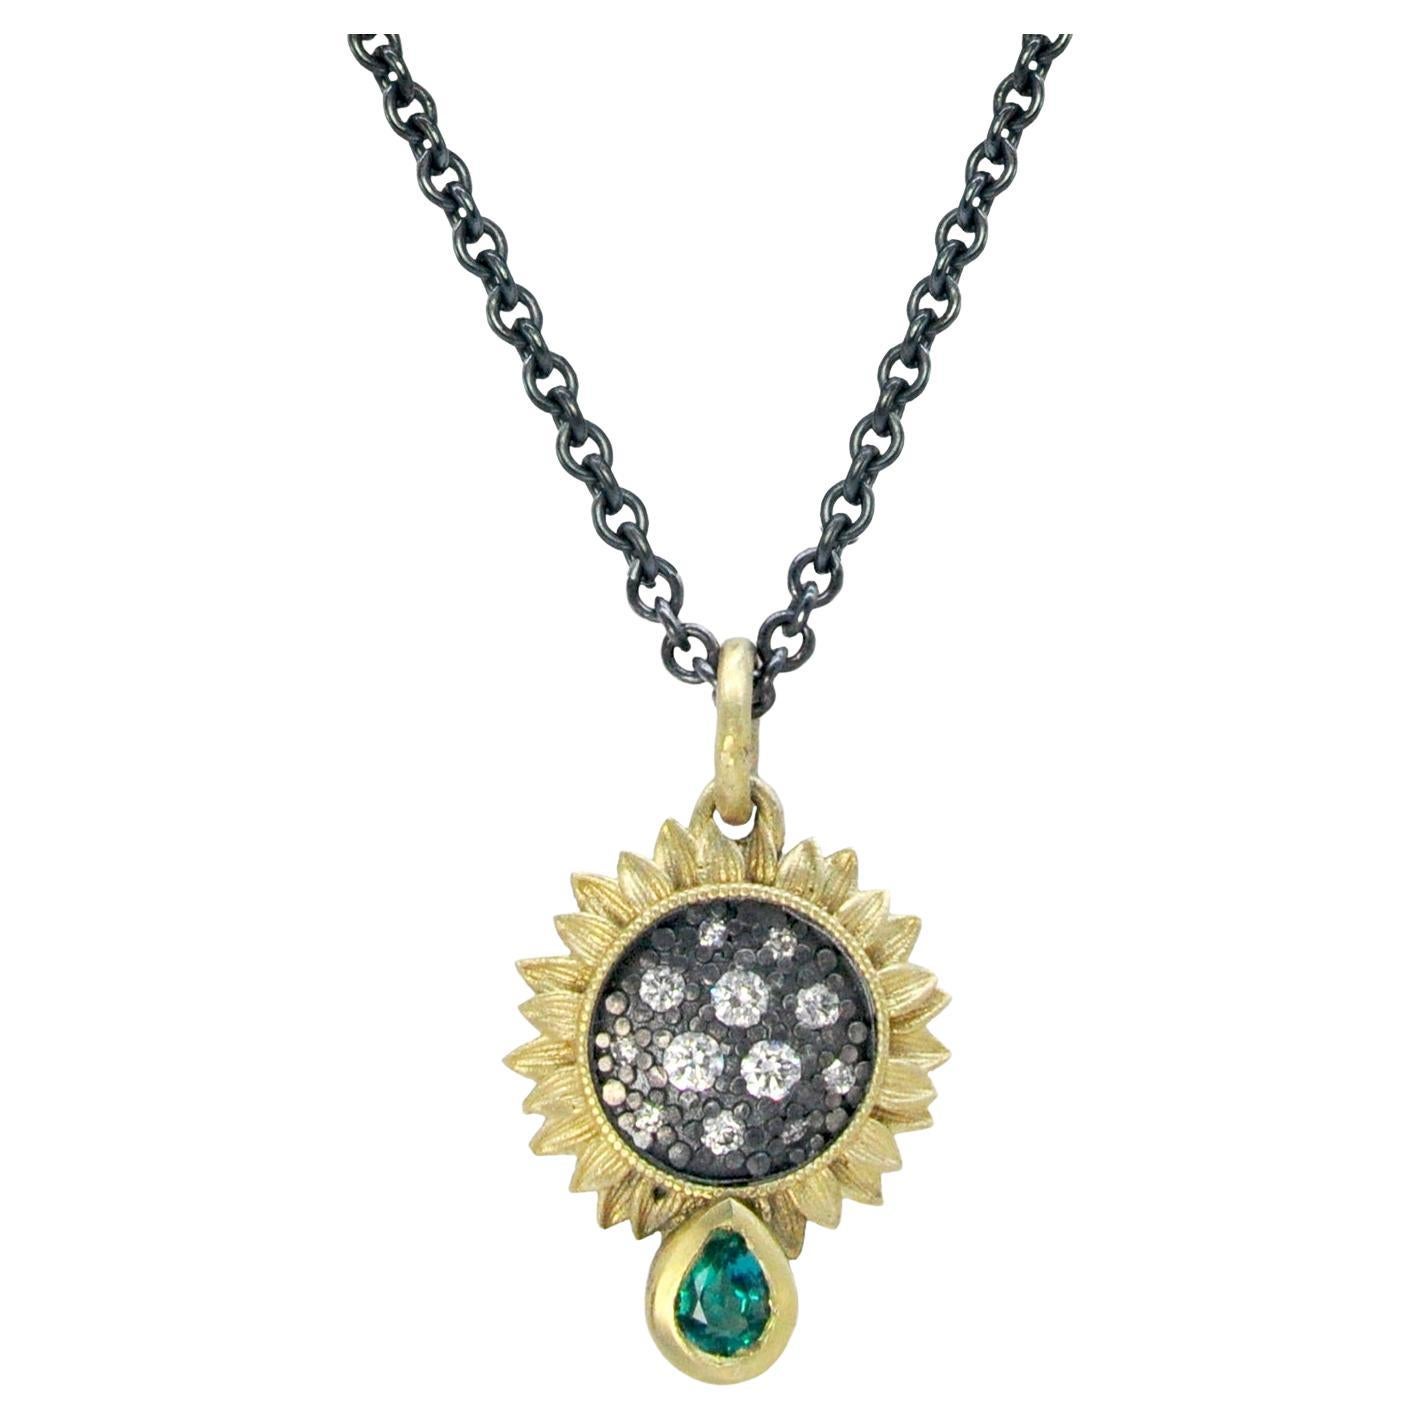 Sunflower Necklace with Pave Set Diamonds in Oxidized Silver with Emerald, Small For Sale